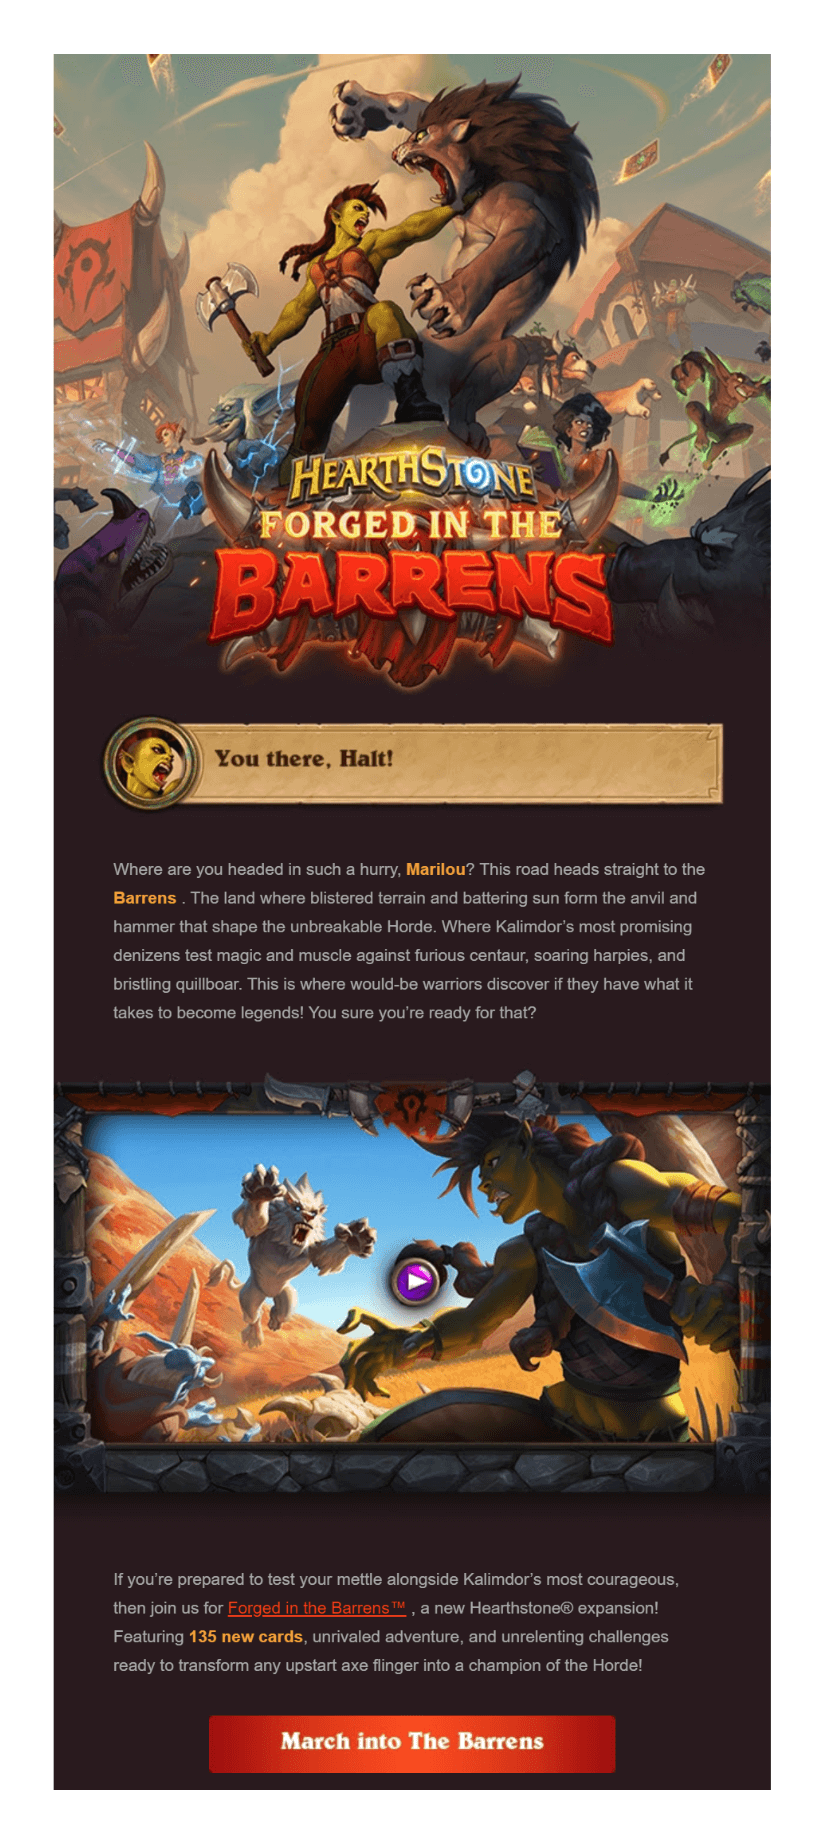 blizzard email marketing tips for copy